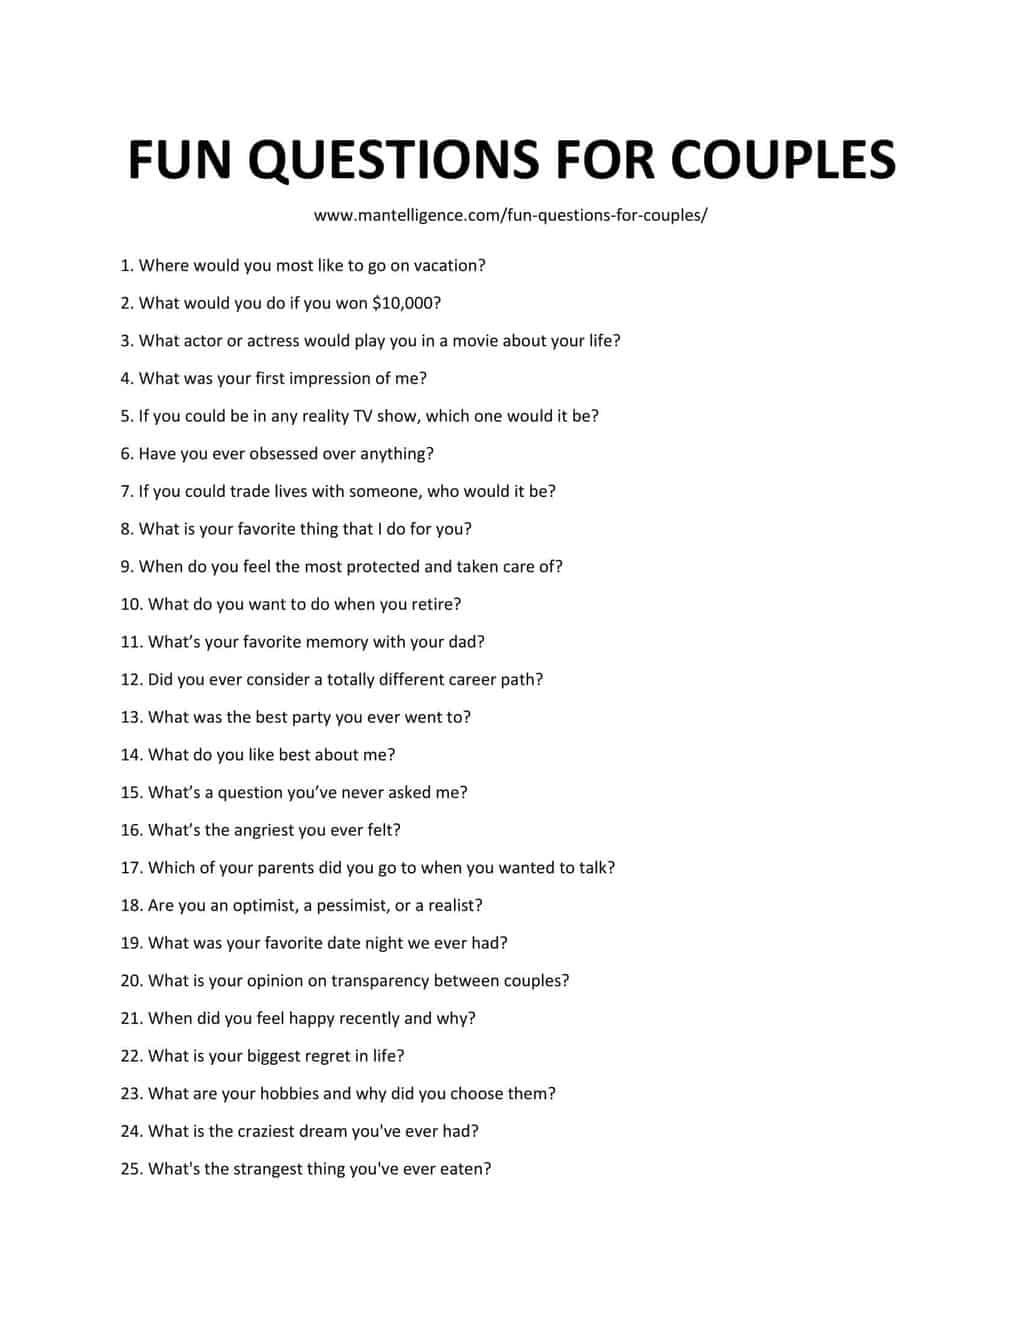 FUN QUESTIONS FOR COUPLES 